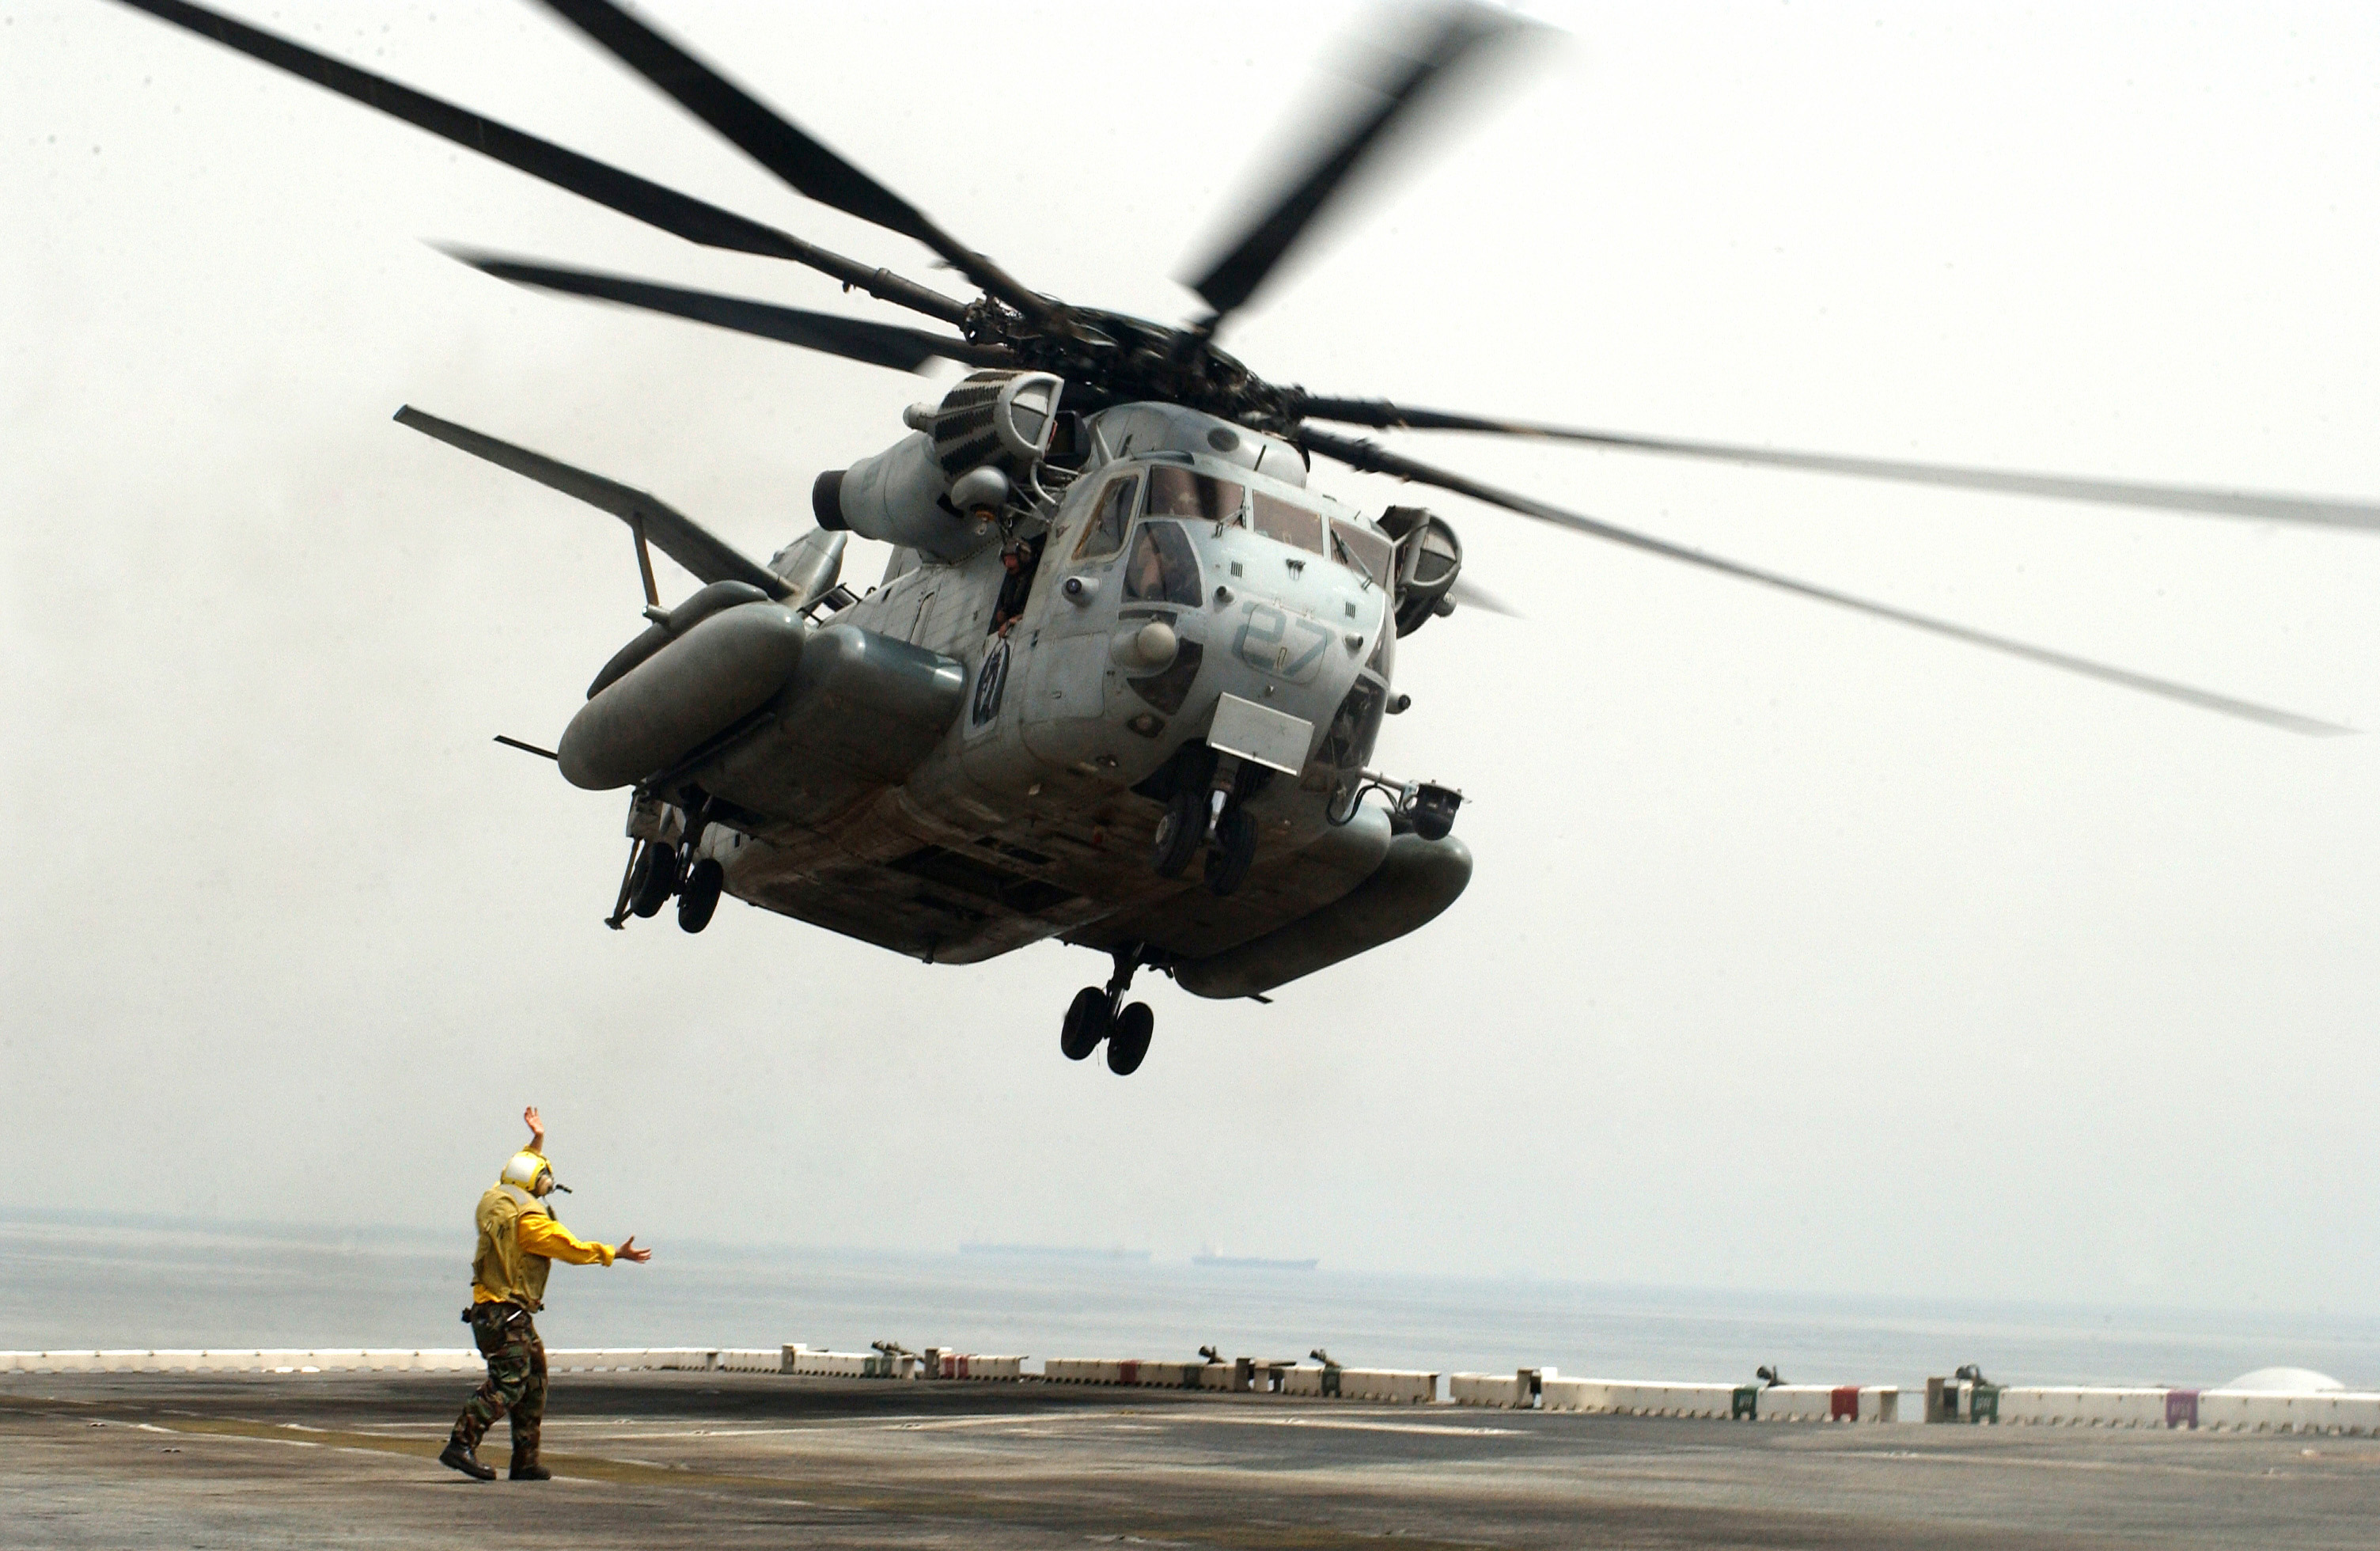 US Navy 060430-N-9866B-042 A CH-53 Super Stallion helicopter takes off from the flight deck aboard the amphibious assault ship USS Peleliu (LHA 5)